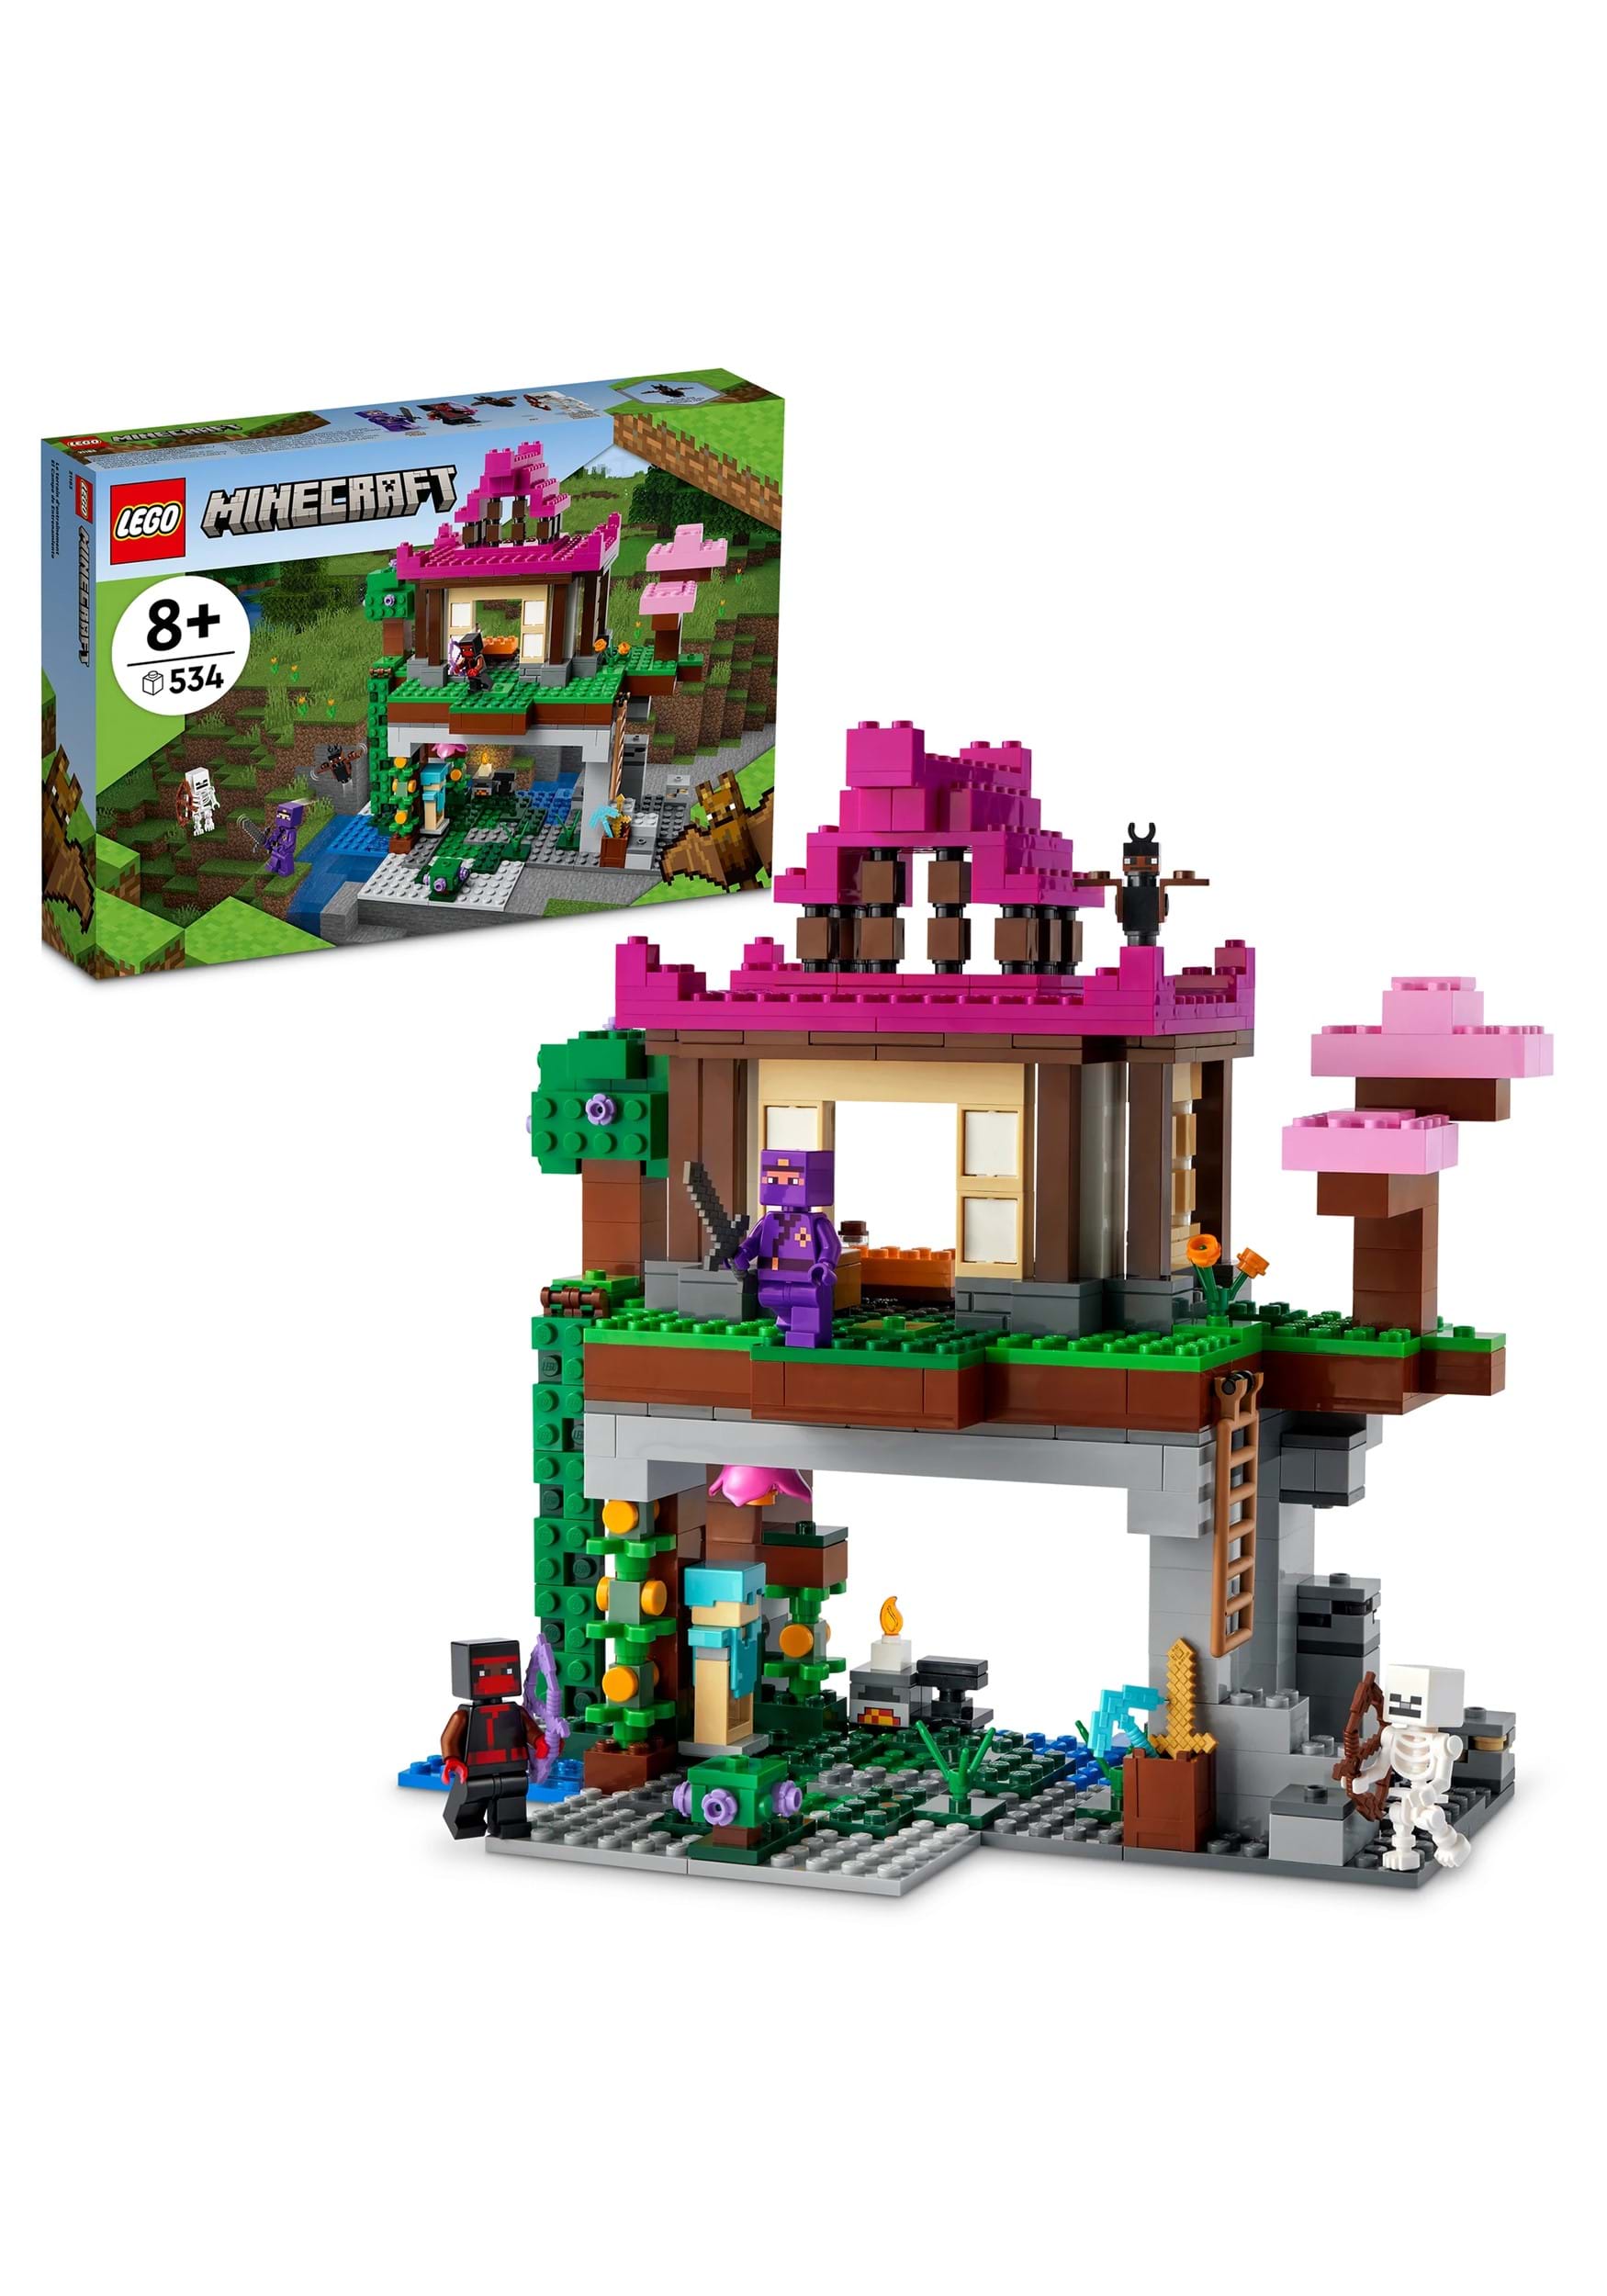 LEGO Minecraft The Training Grounds Building Kit